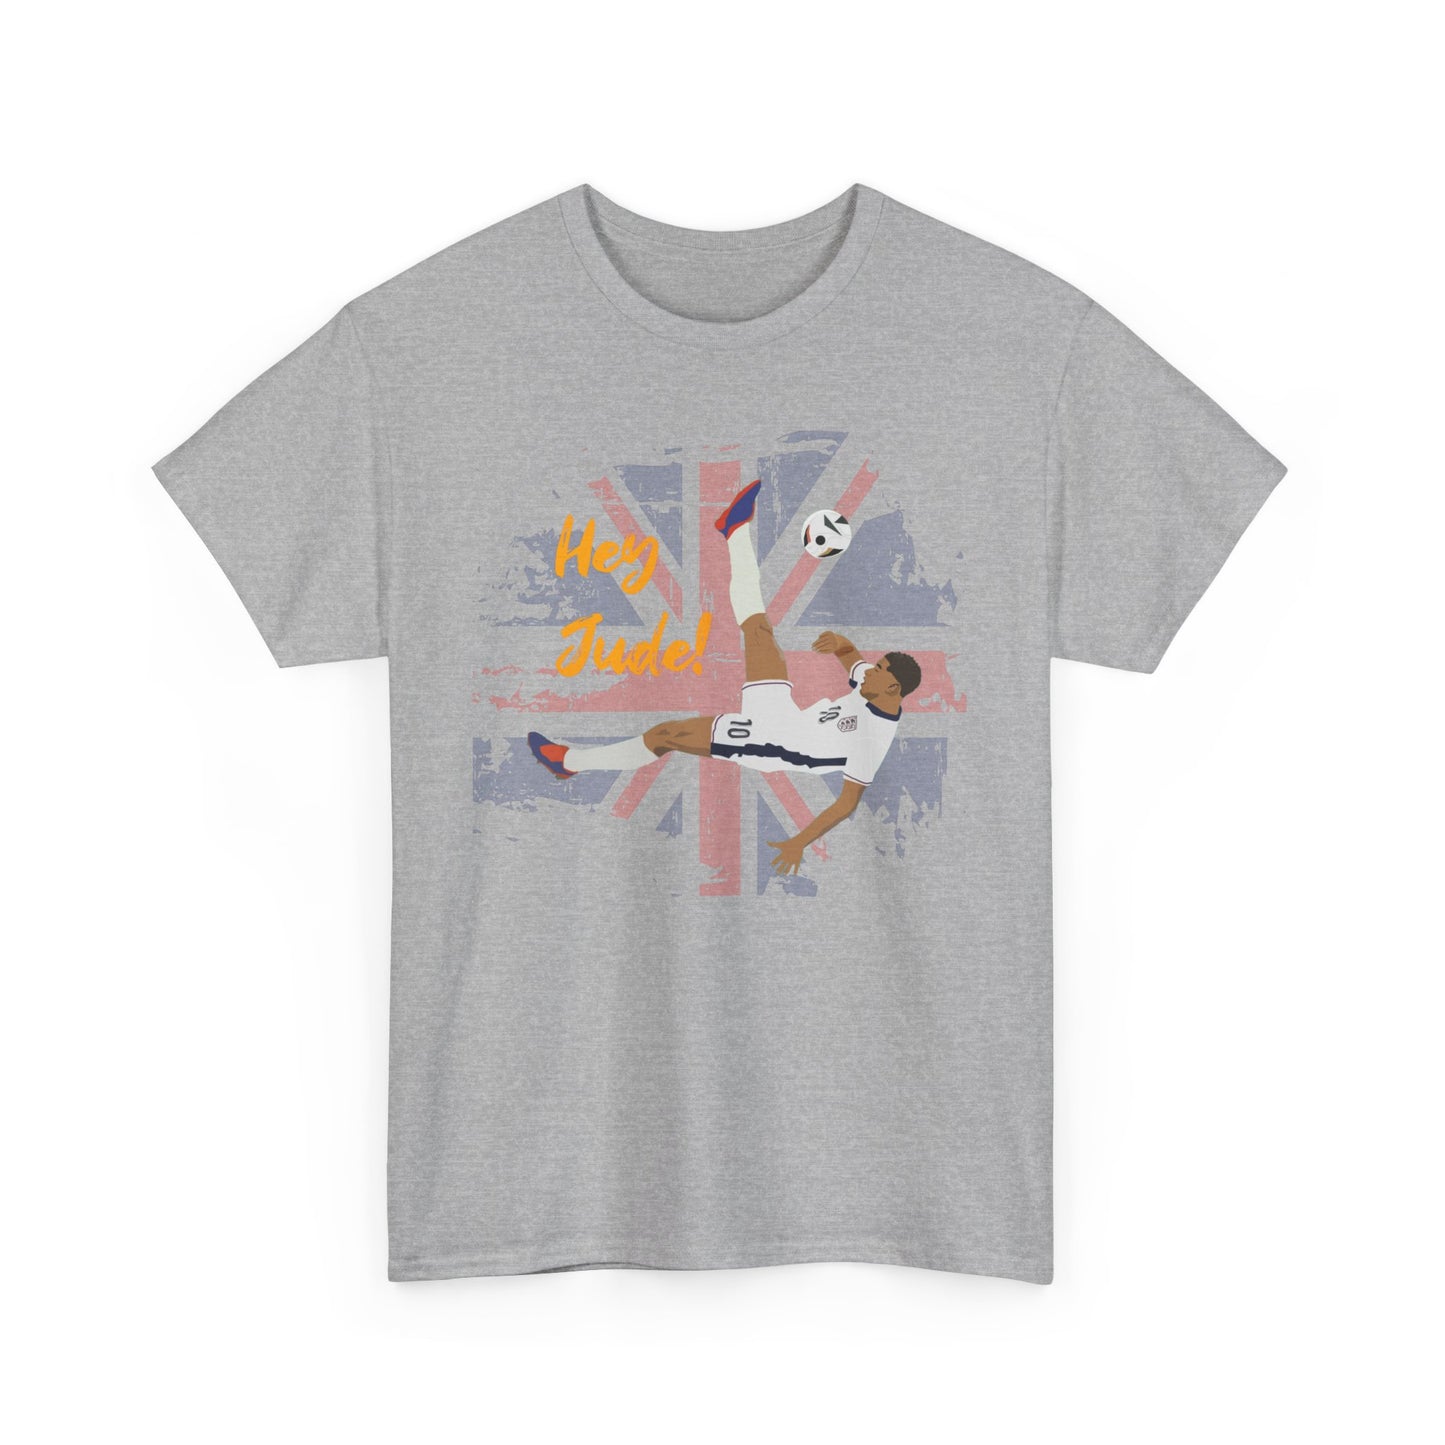 England Jude Bellingham Bicycle Kick High Quality Printed Unisex Heavy Cotton T-shirt